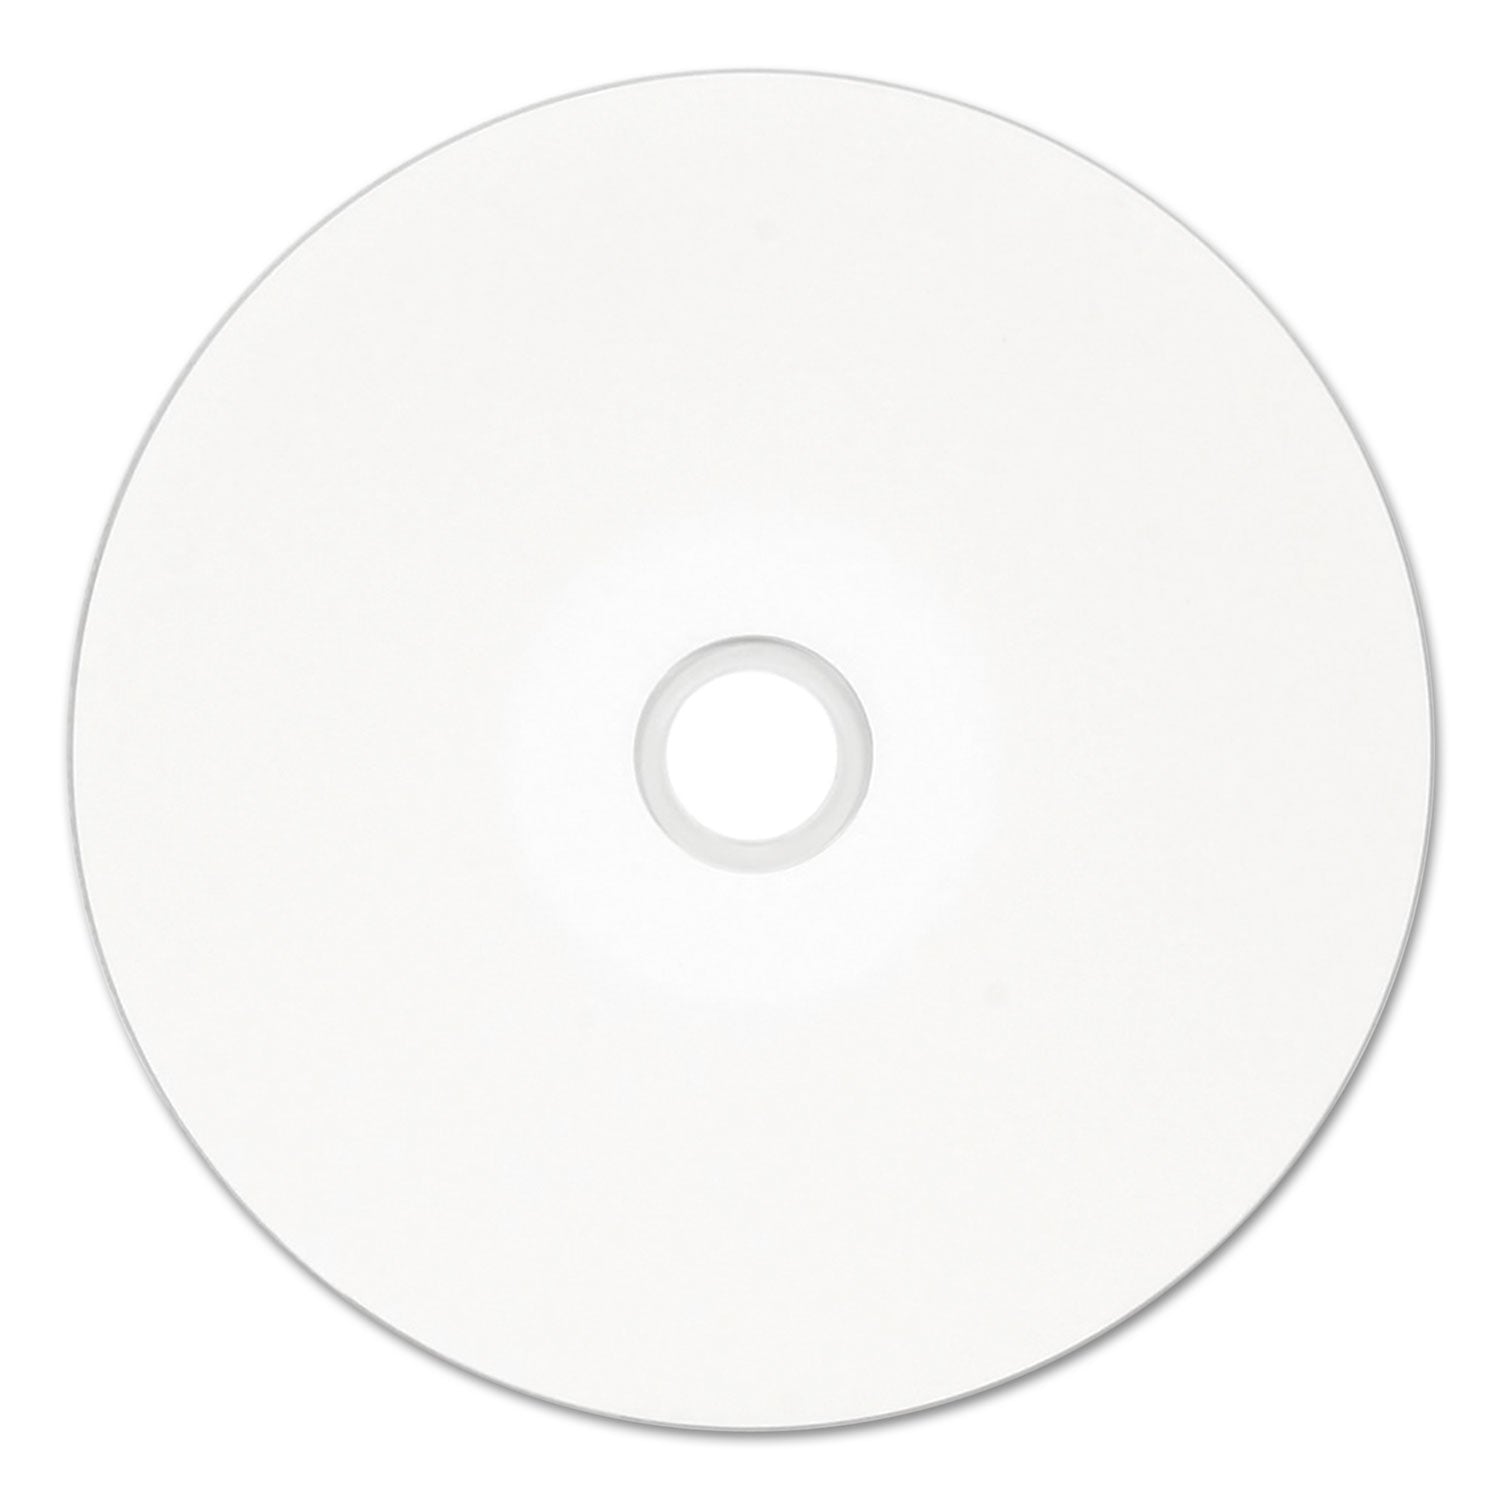 DVD+R Recordable Disc, 4.7 GB, 16x, Spindle, Hub Printable, White, 50/Pack - 